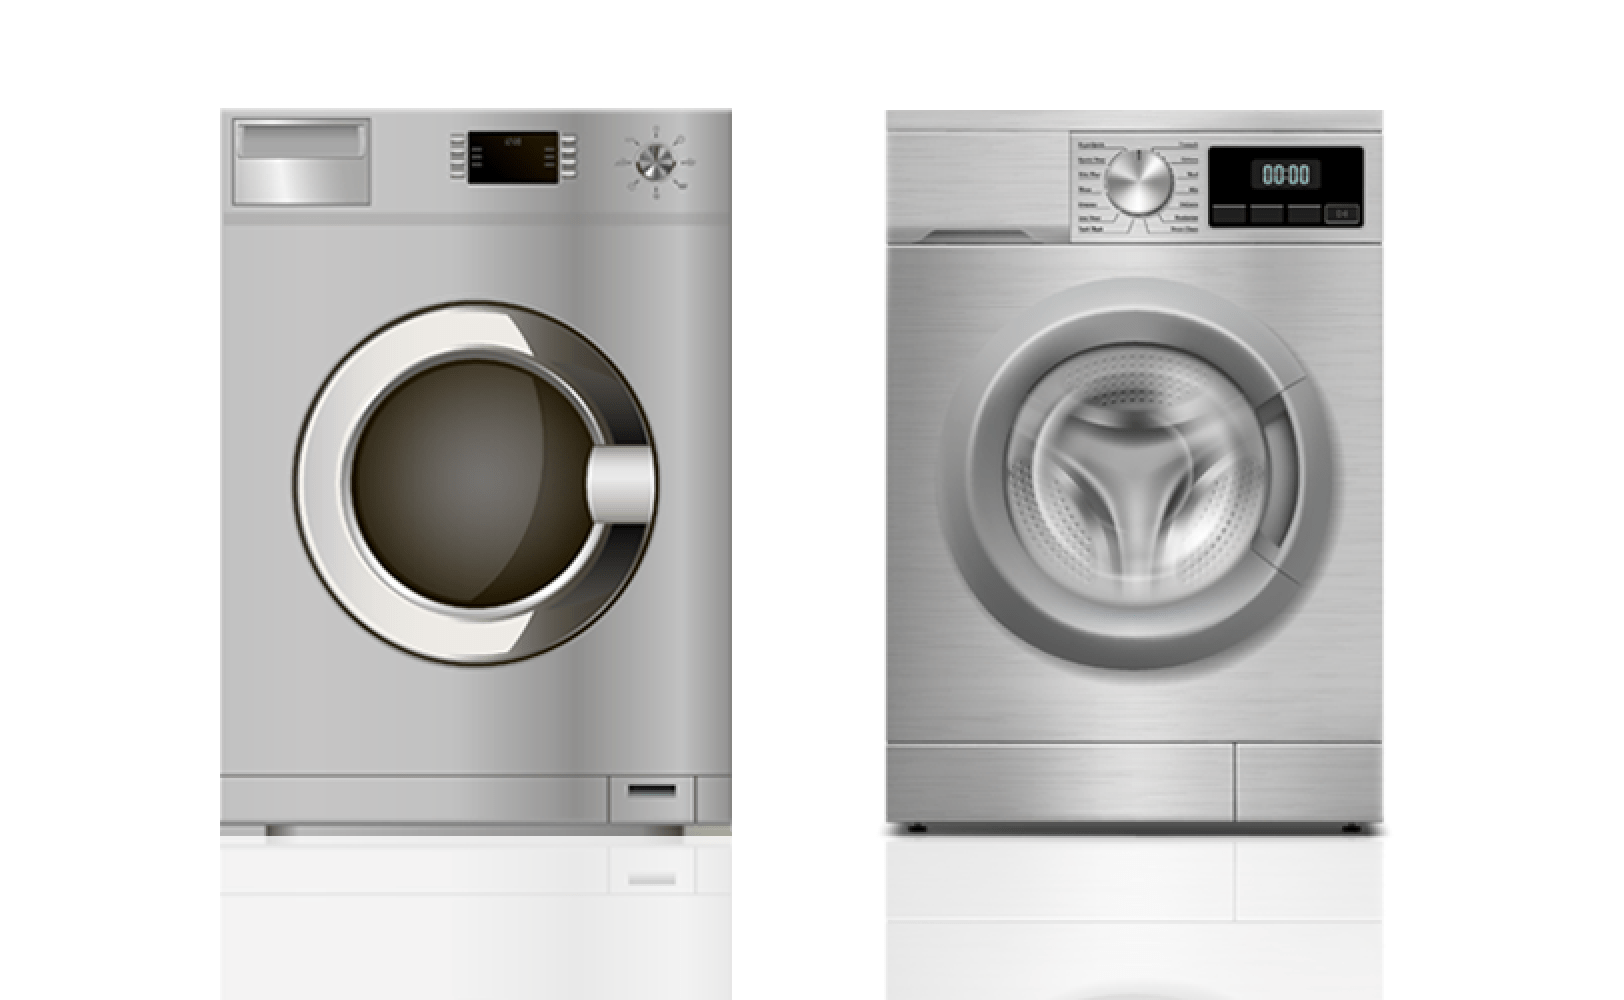 Washer Repair Service in Seattle